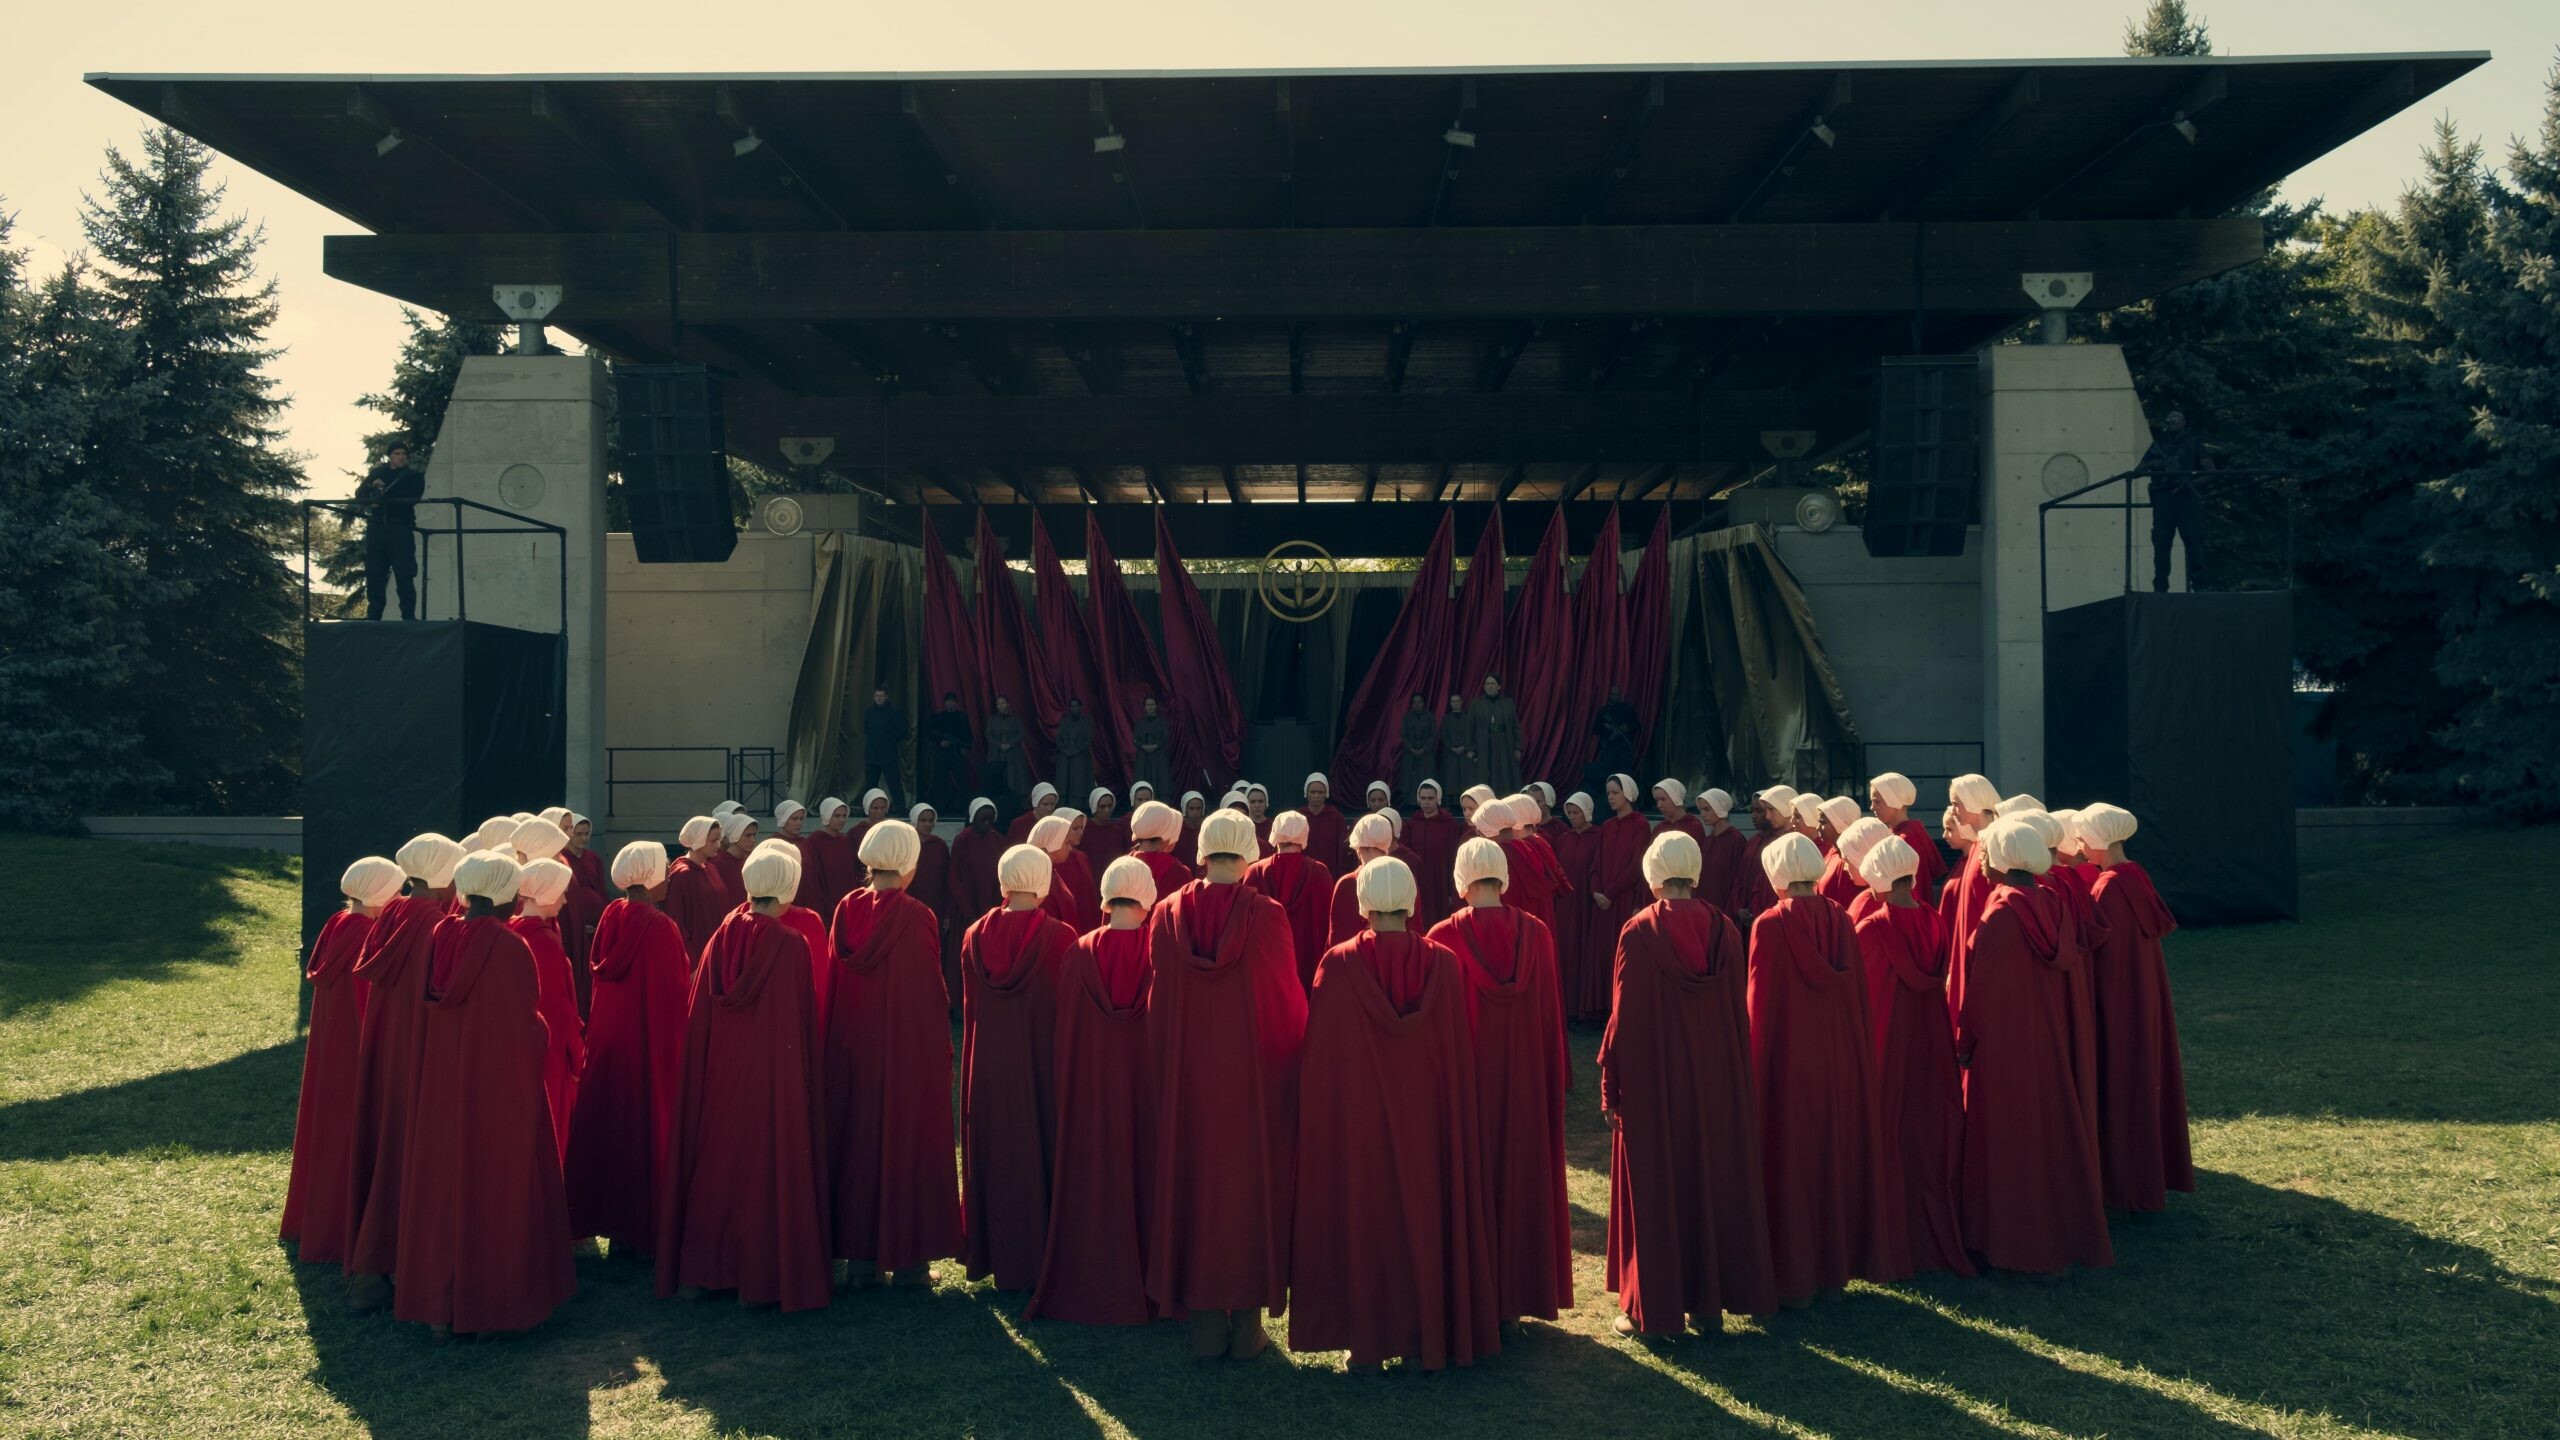 The Handmaid's Tale: The plot features a dystopia following a Second American Civil War. 2560x1440 HD Background.